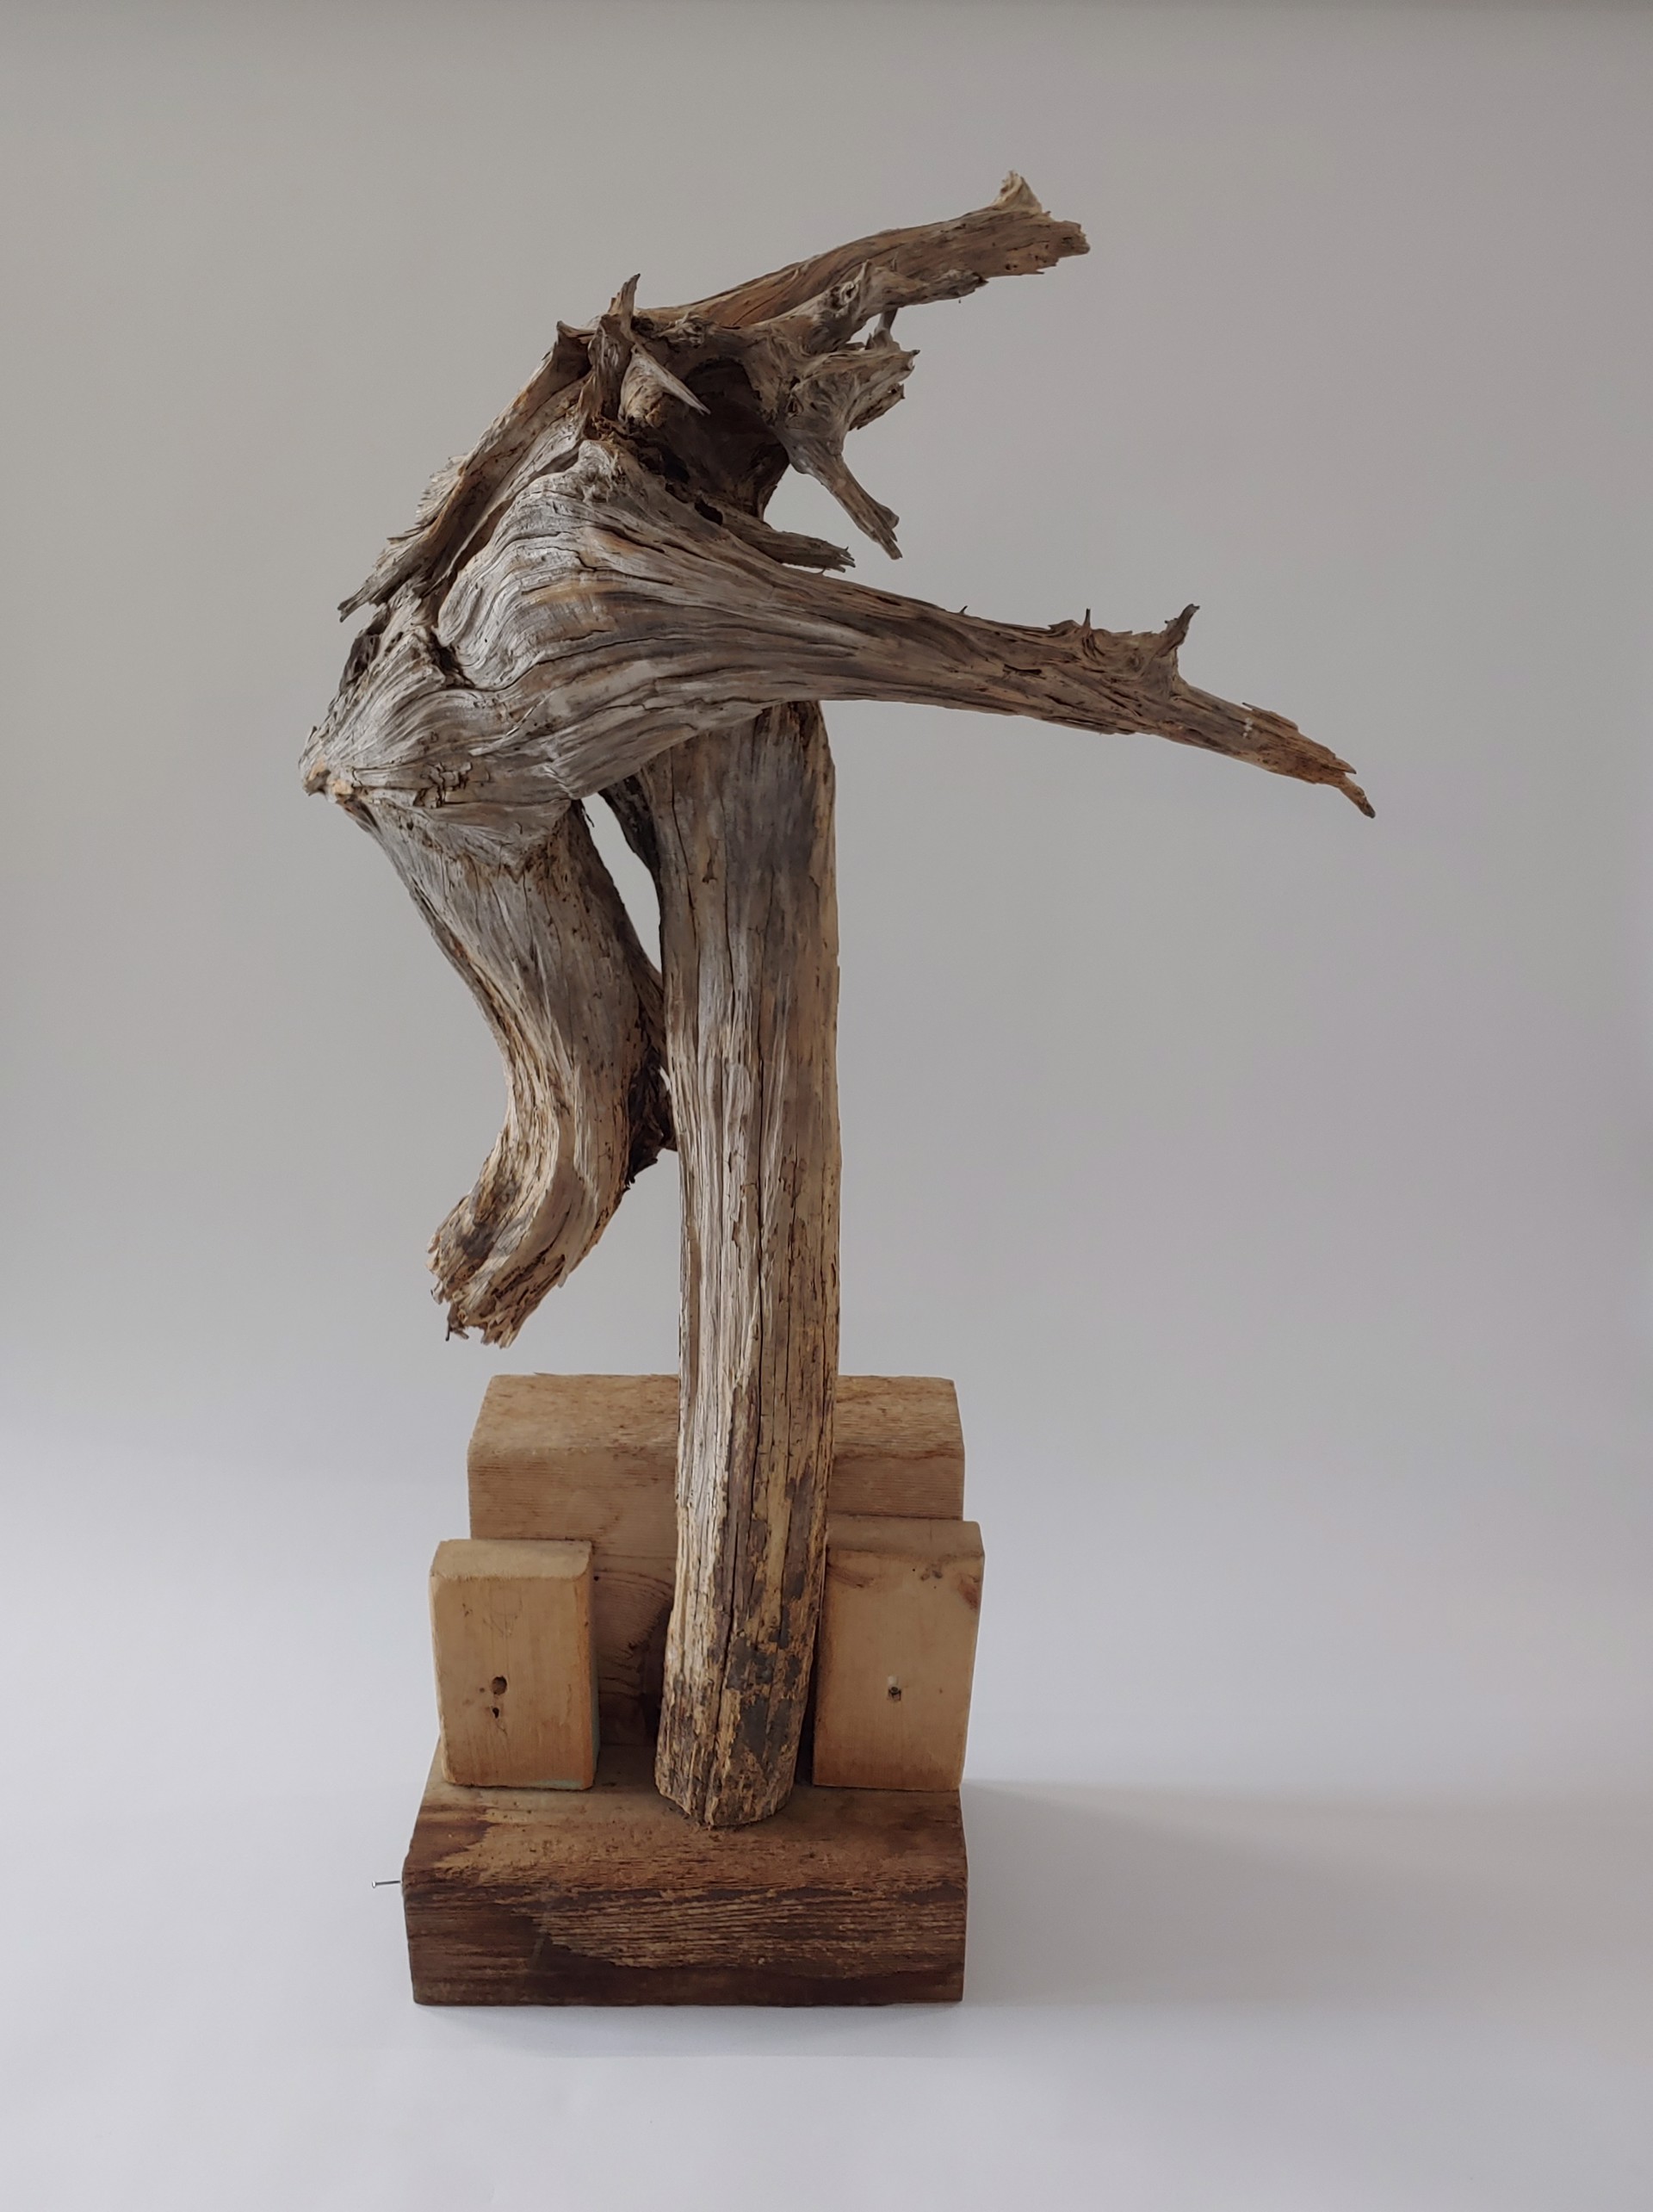 Abstract  #4 - Wood Sculpture, unfinished by David Amdur